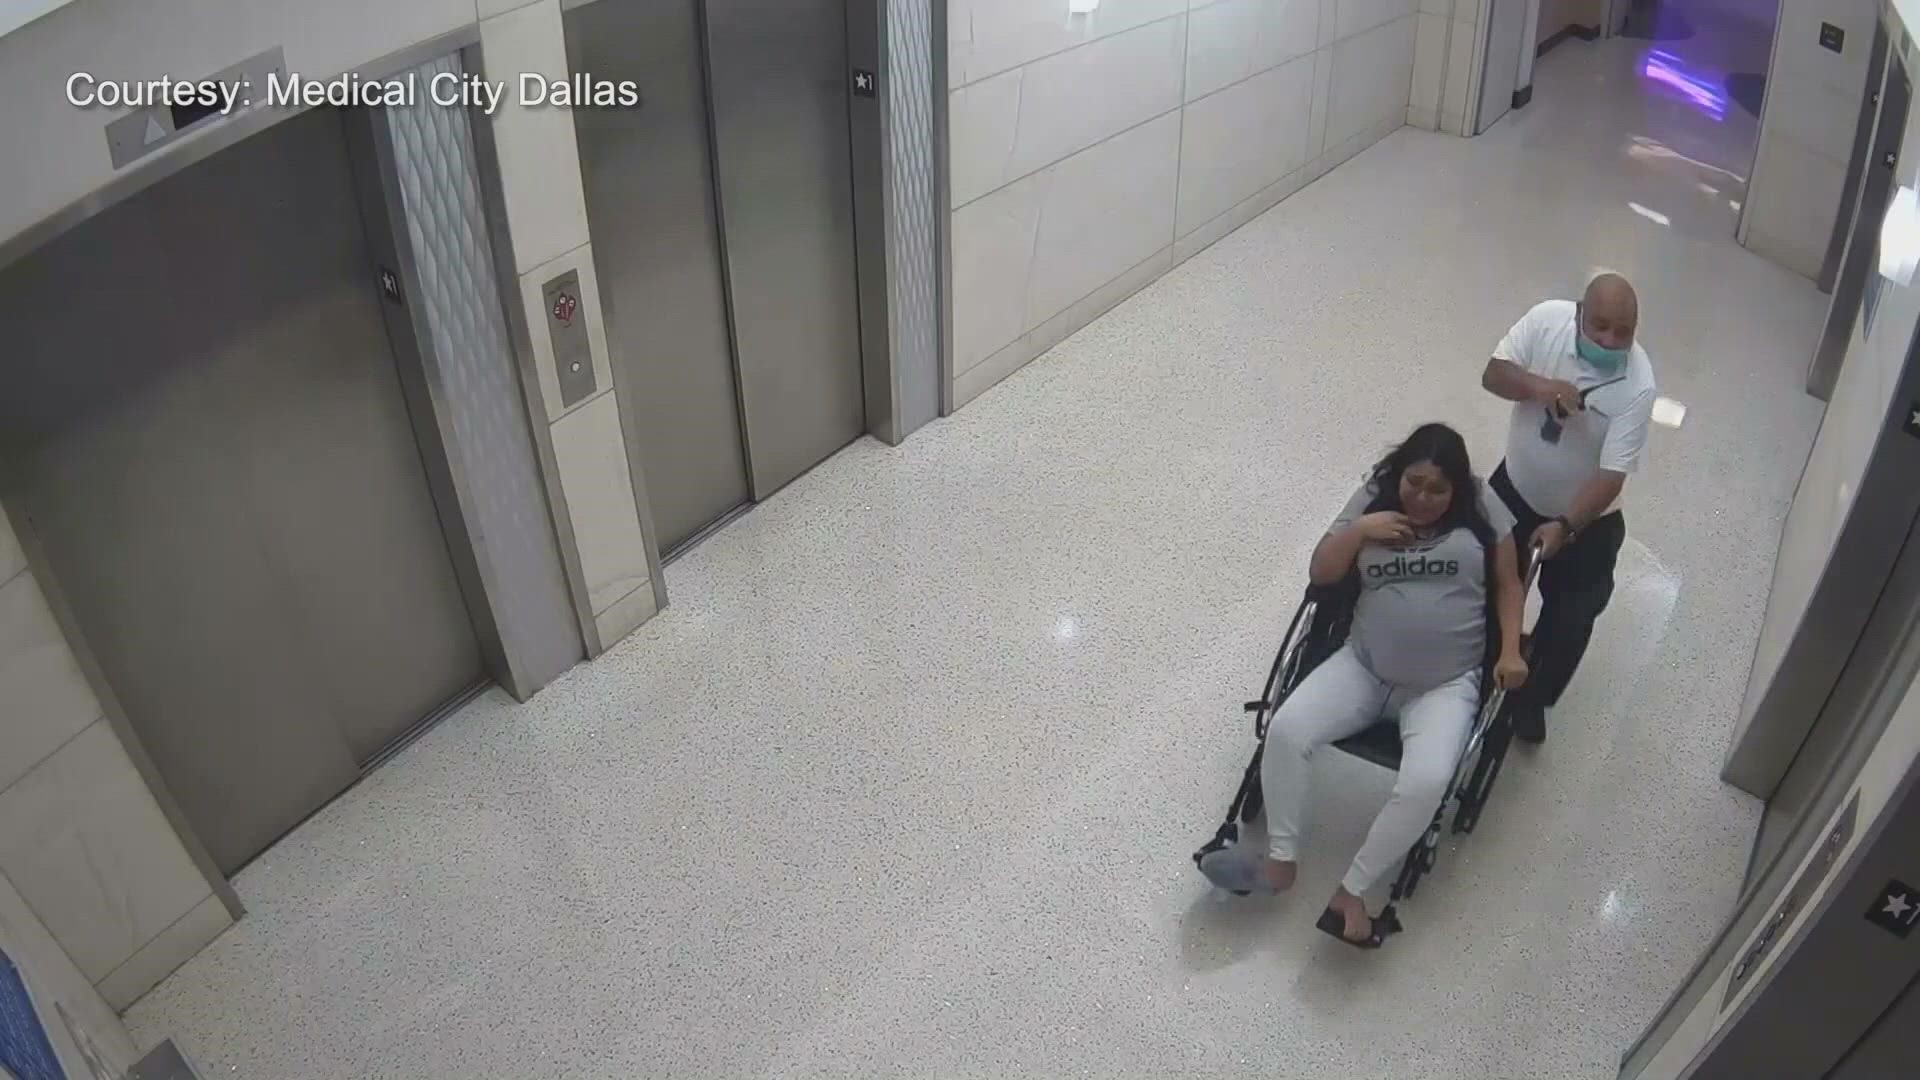 Security footage captures the guard wheeling the expecting mom into an elevator, and on the next floor, she's being wheeled out, baby in hand.